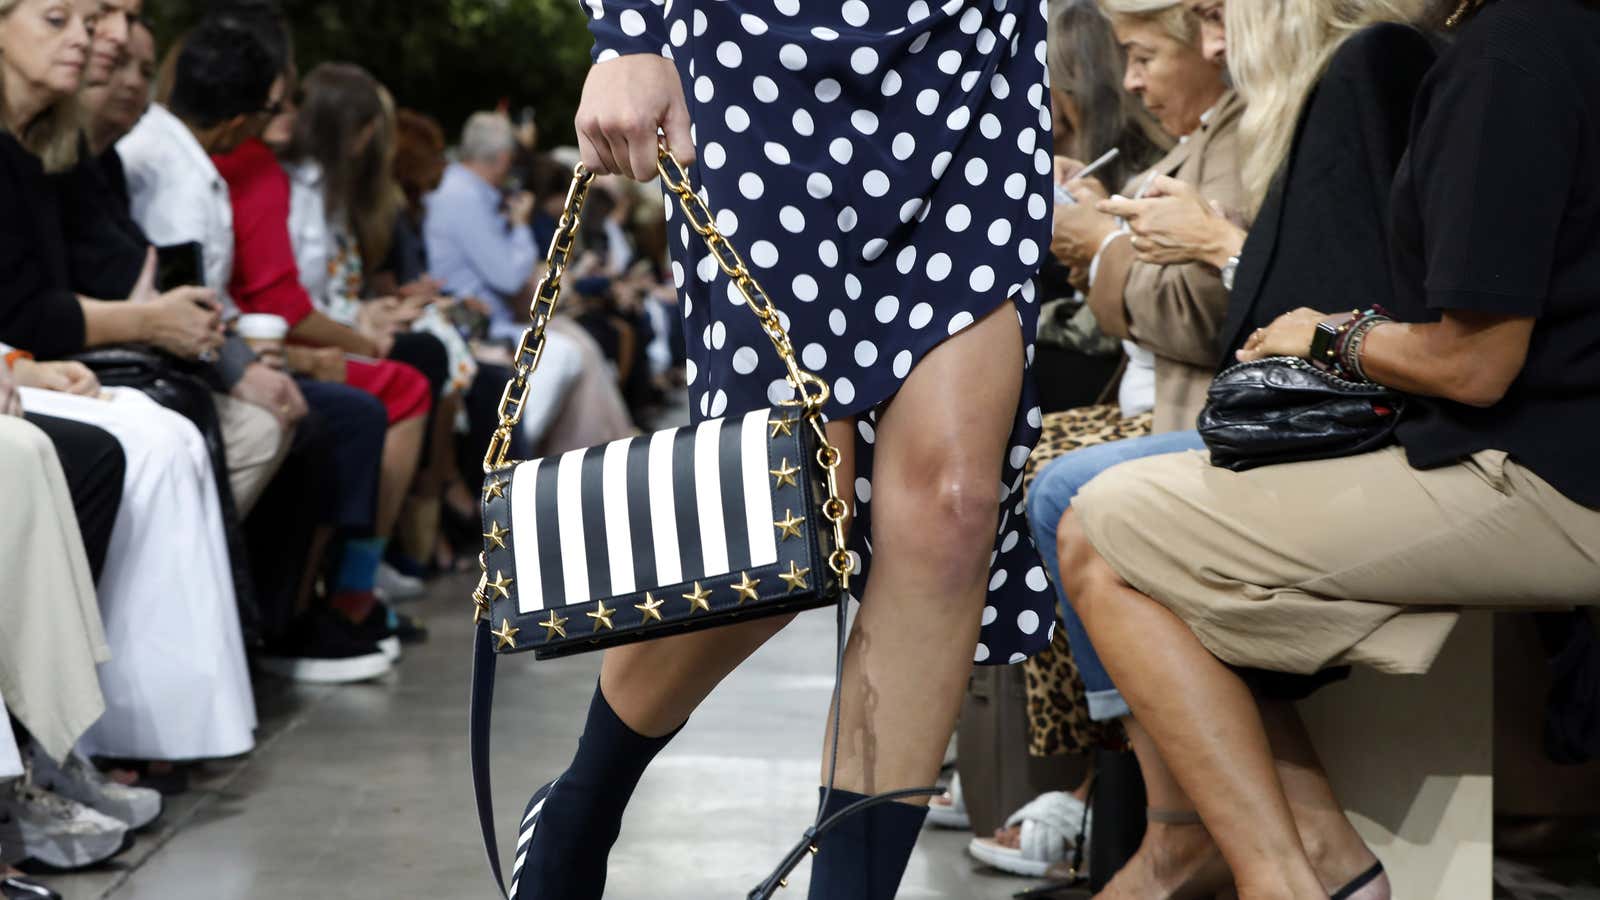 Handbag sales are plunging as women's backpack sales climb